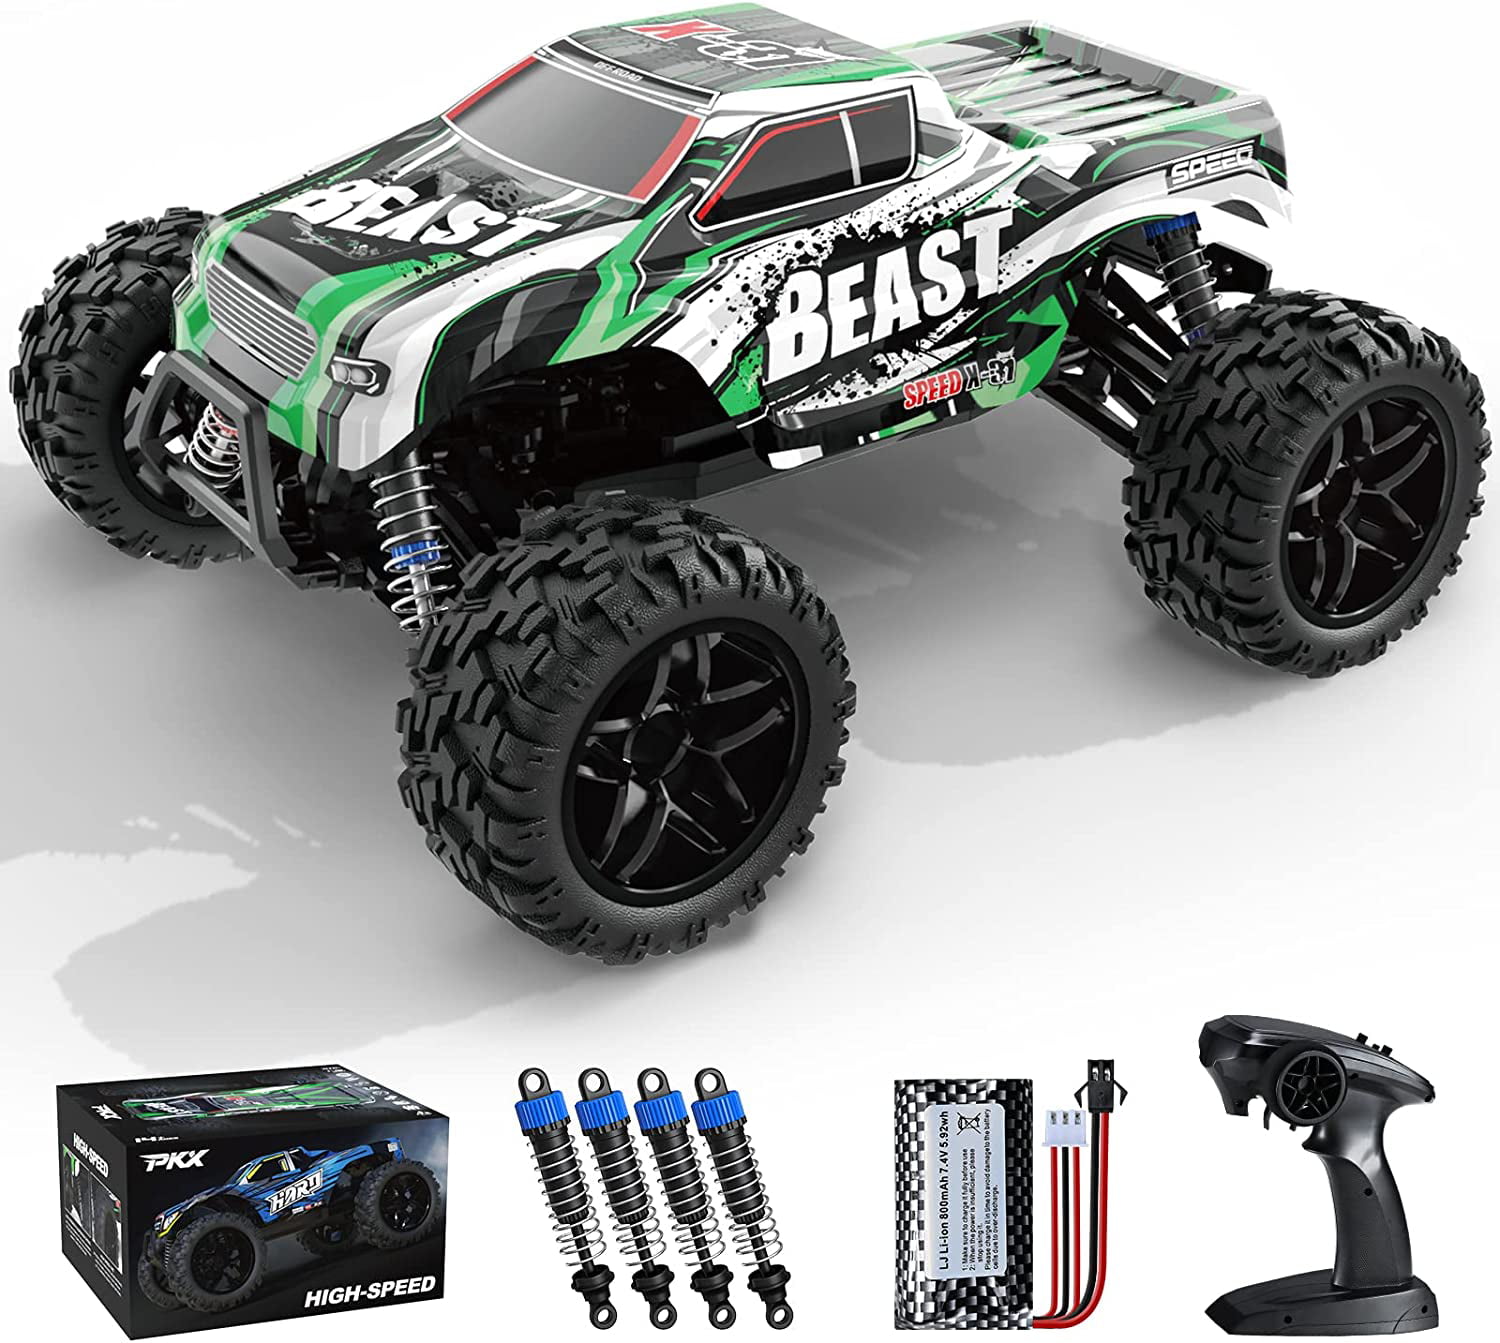 College gebaar Crack pot RC Cars, 1:16 Scale Off Road Remote Control Car, 4WD 19 MPH (30 KM/H) High  Speed, 390 Magnetic Motor, 2.4GHZ All Terrain RC Monster Truck with 7.4V  Battery, Gifts for Boys, Girls,